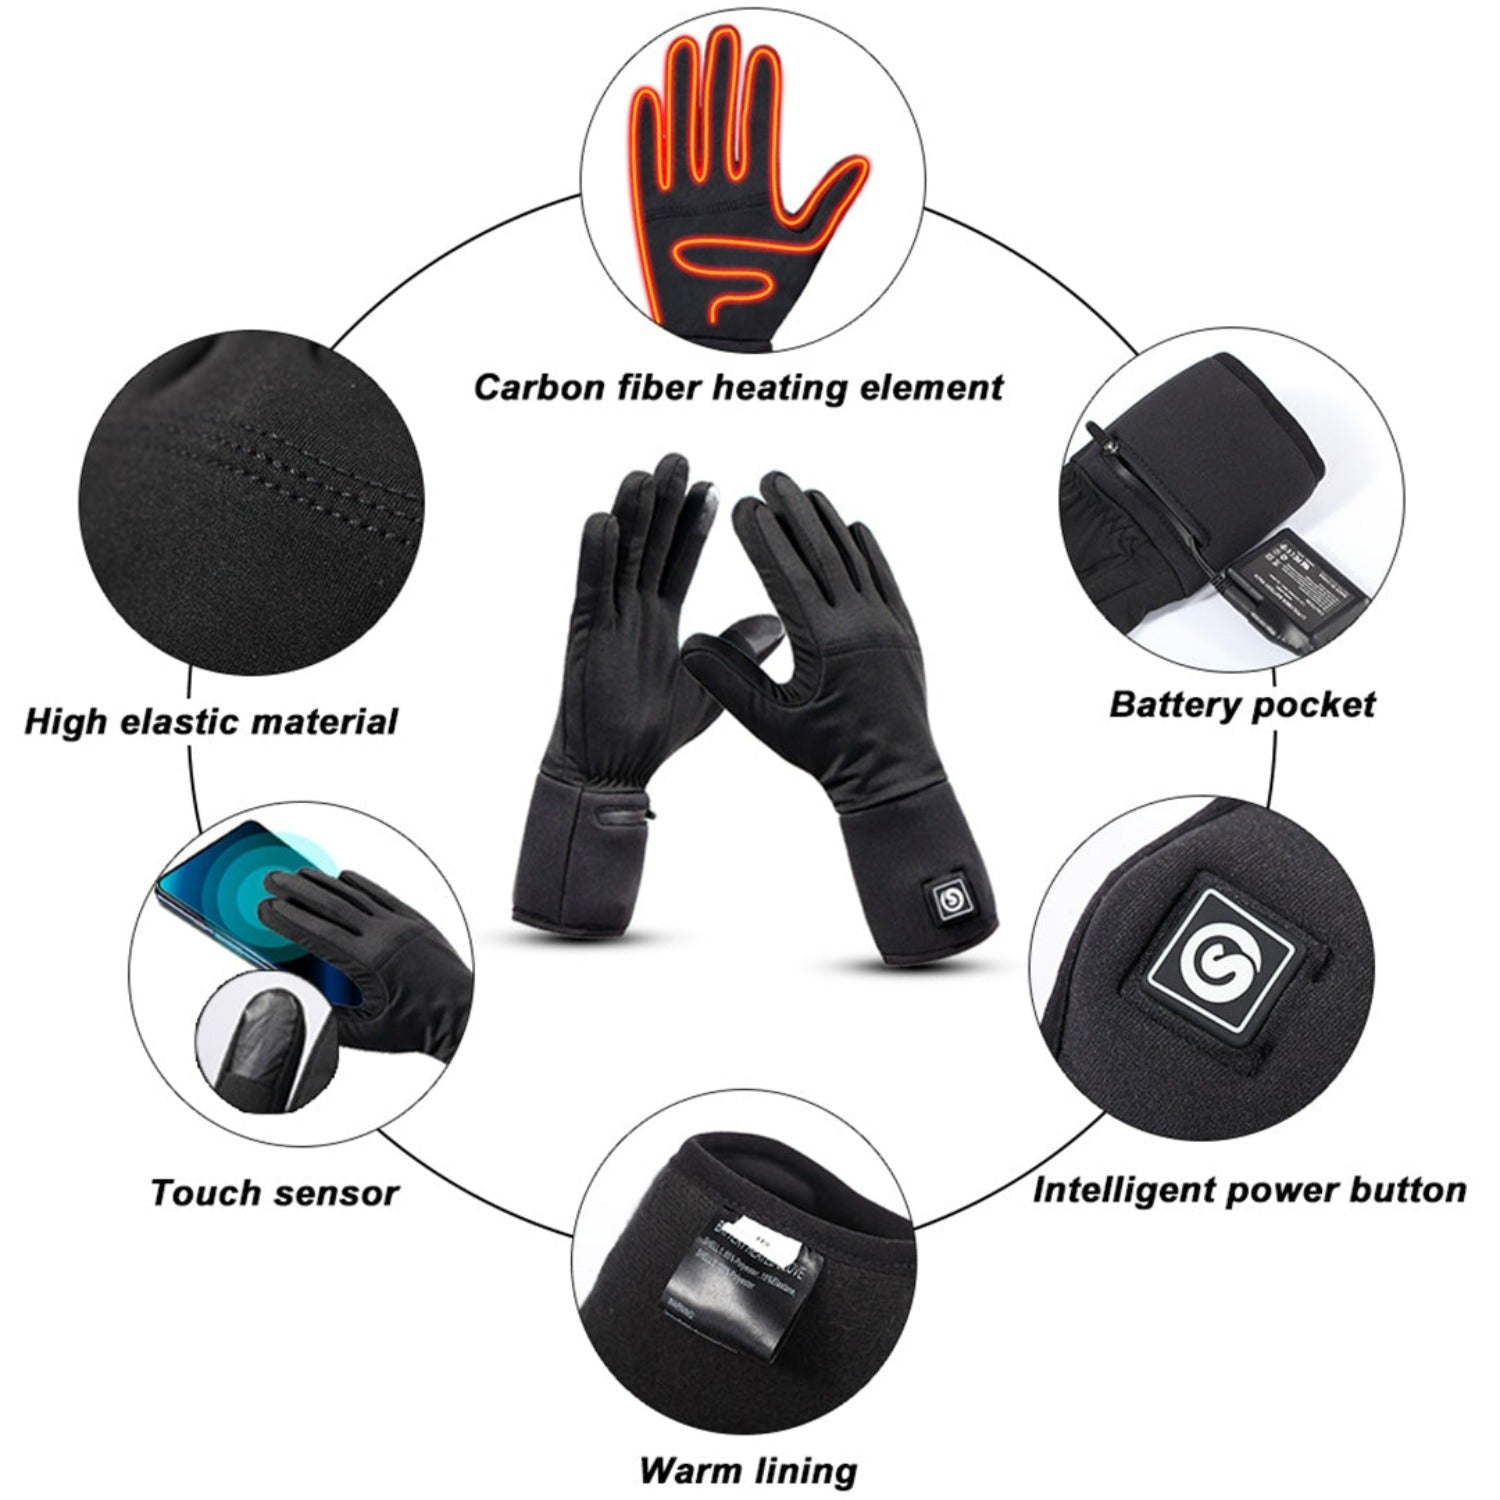 Snow Deer Liners Heated Gloves Mittensfor Men Women Rechargeable Electric Battery Ski Snowboarding Hiking Cycling Hunting Thin Gloves Hand Warmer